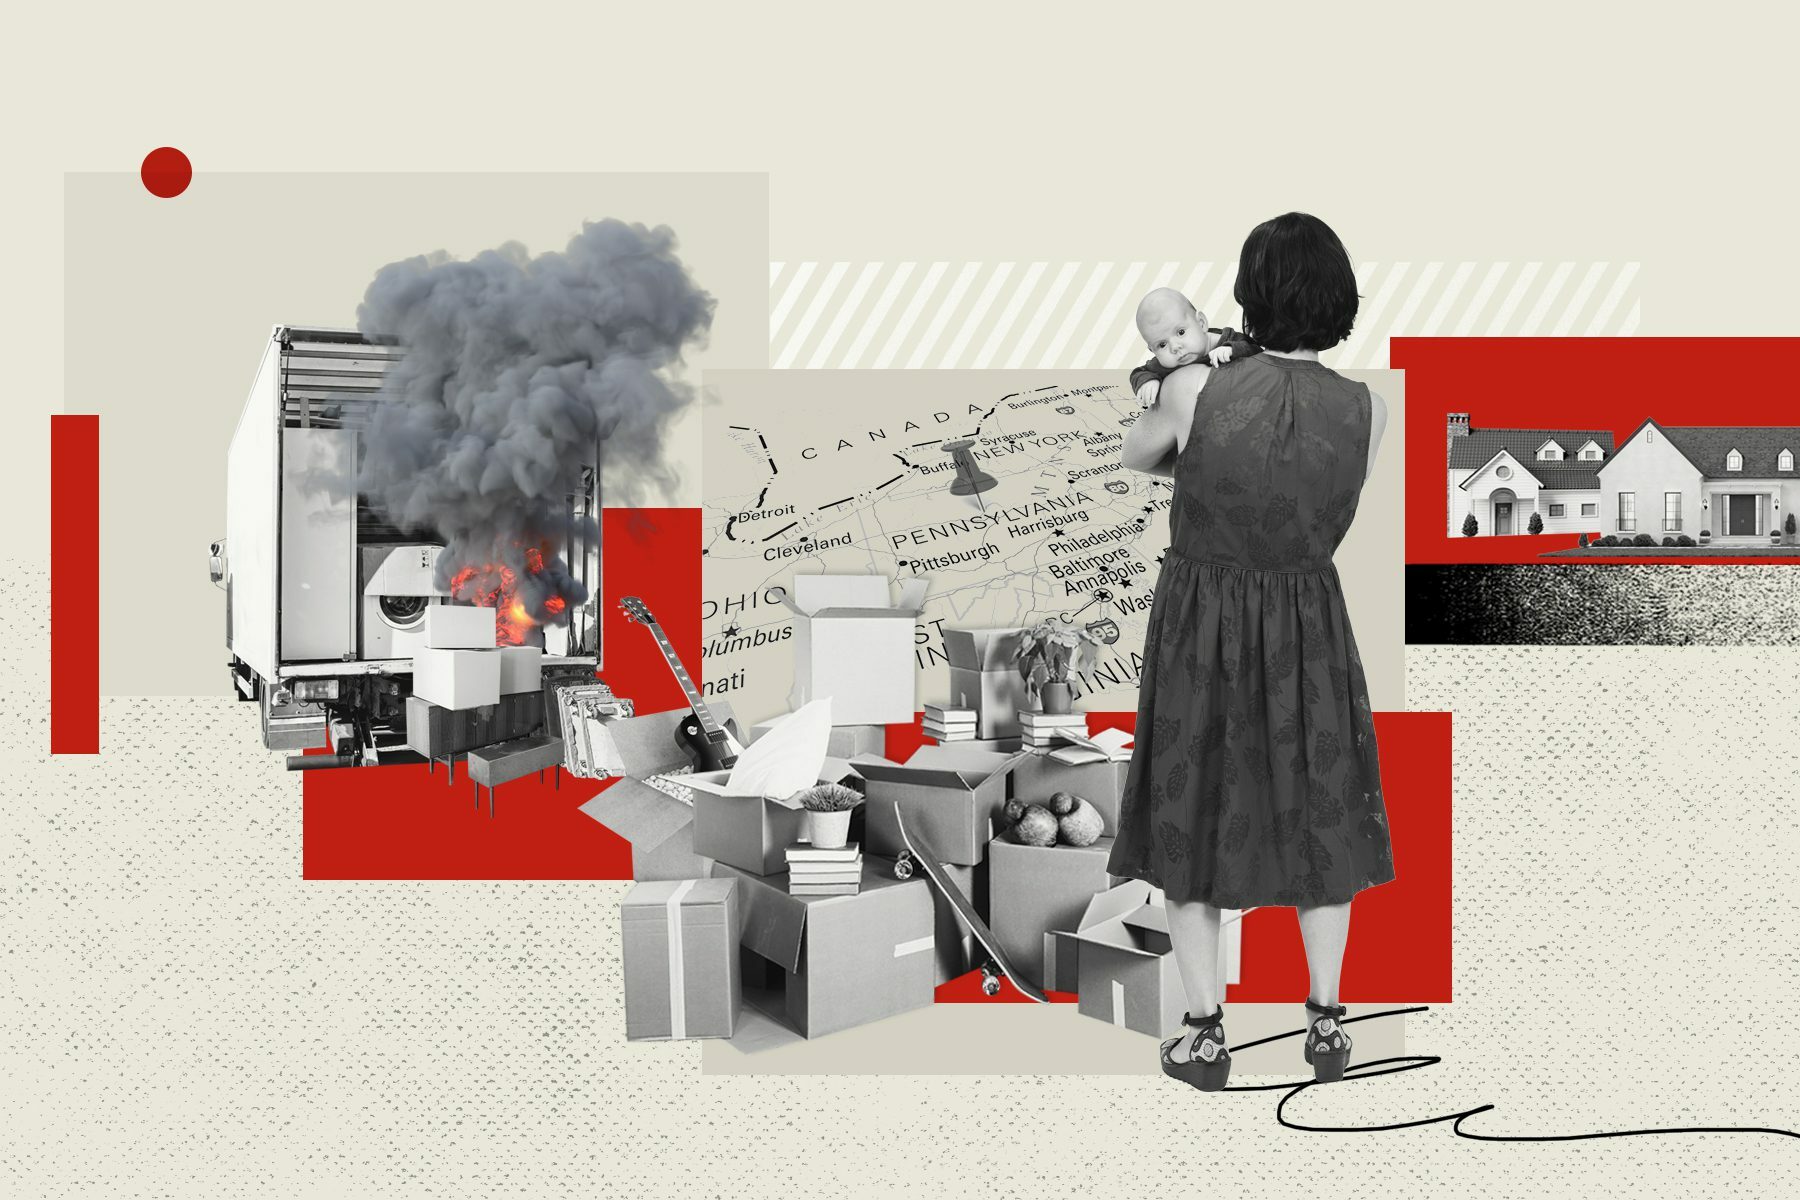 Collage depicting a mother holding a baby, moving boxes, a moving truck on fire, a map of Pennsylvania and a suburban home.